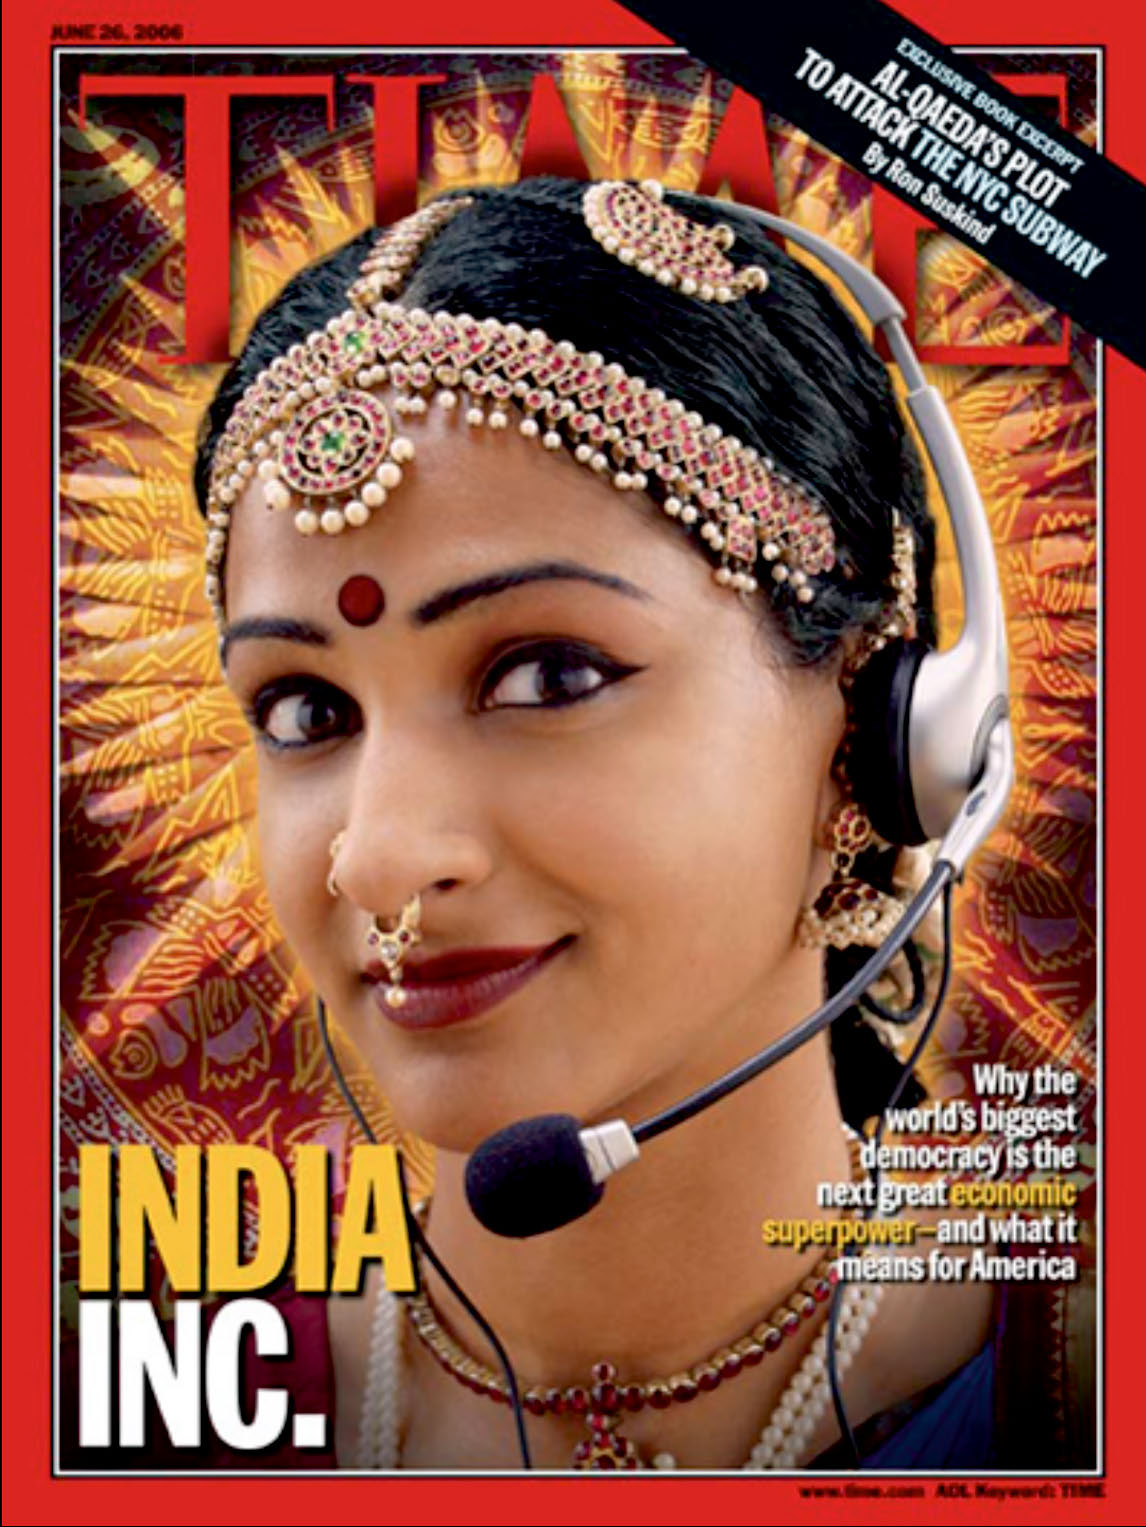 Cover of the Time Magazine showing a portrait of a person with traditional female Indian jewelry and a headset. The lettering reads 